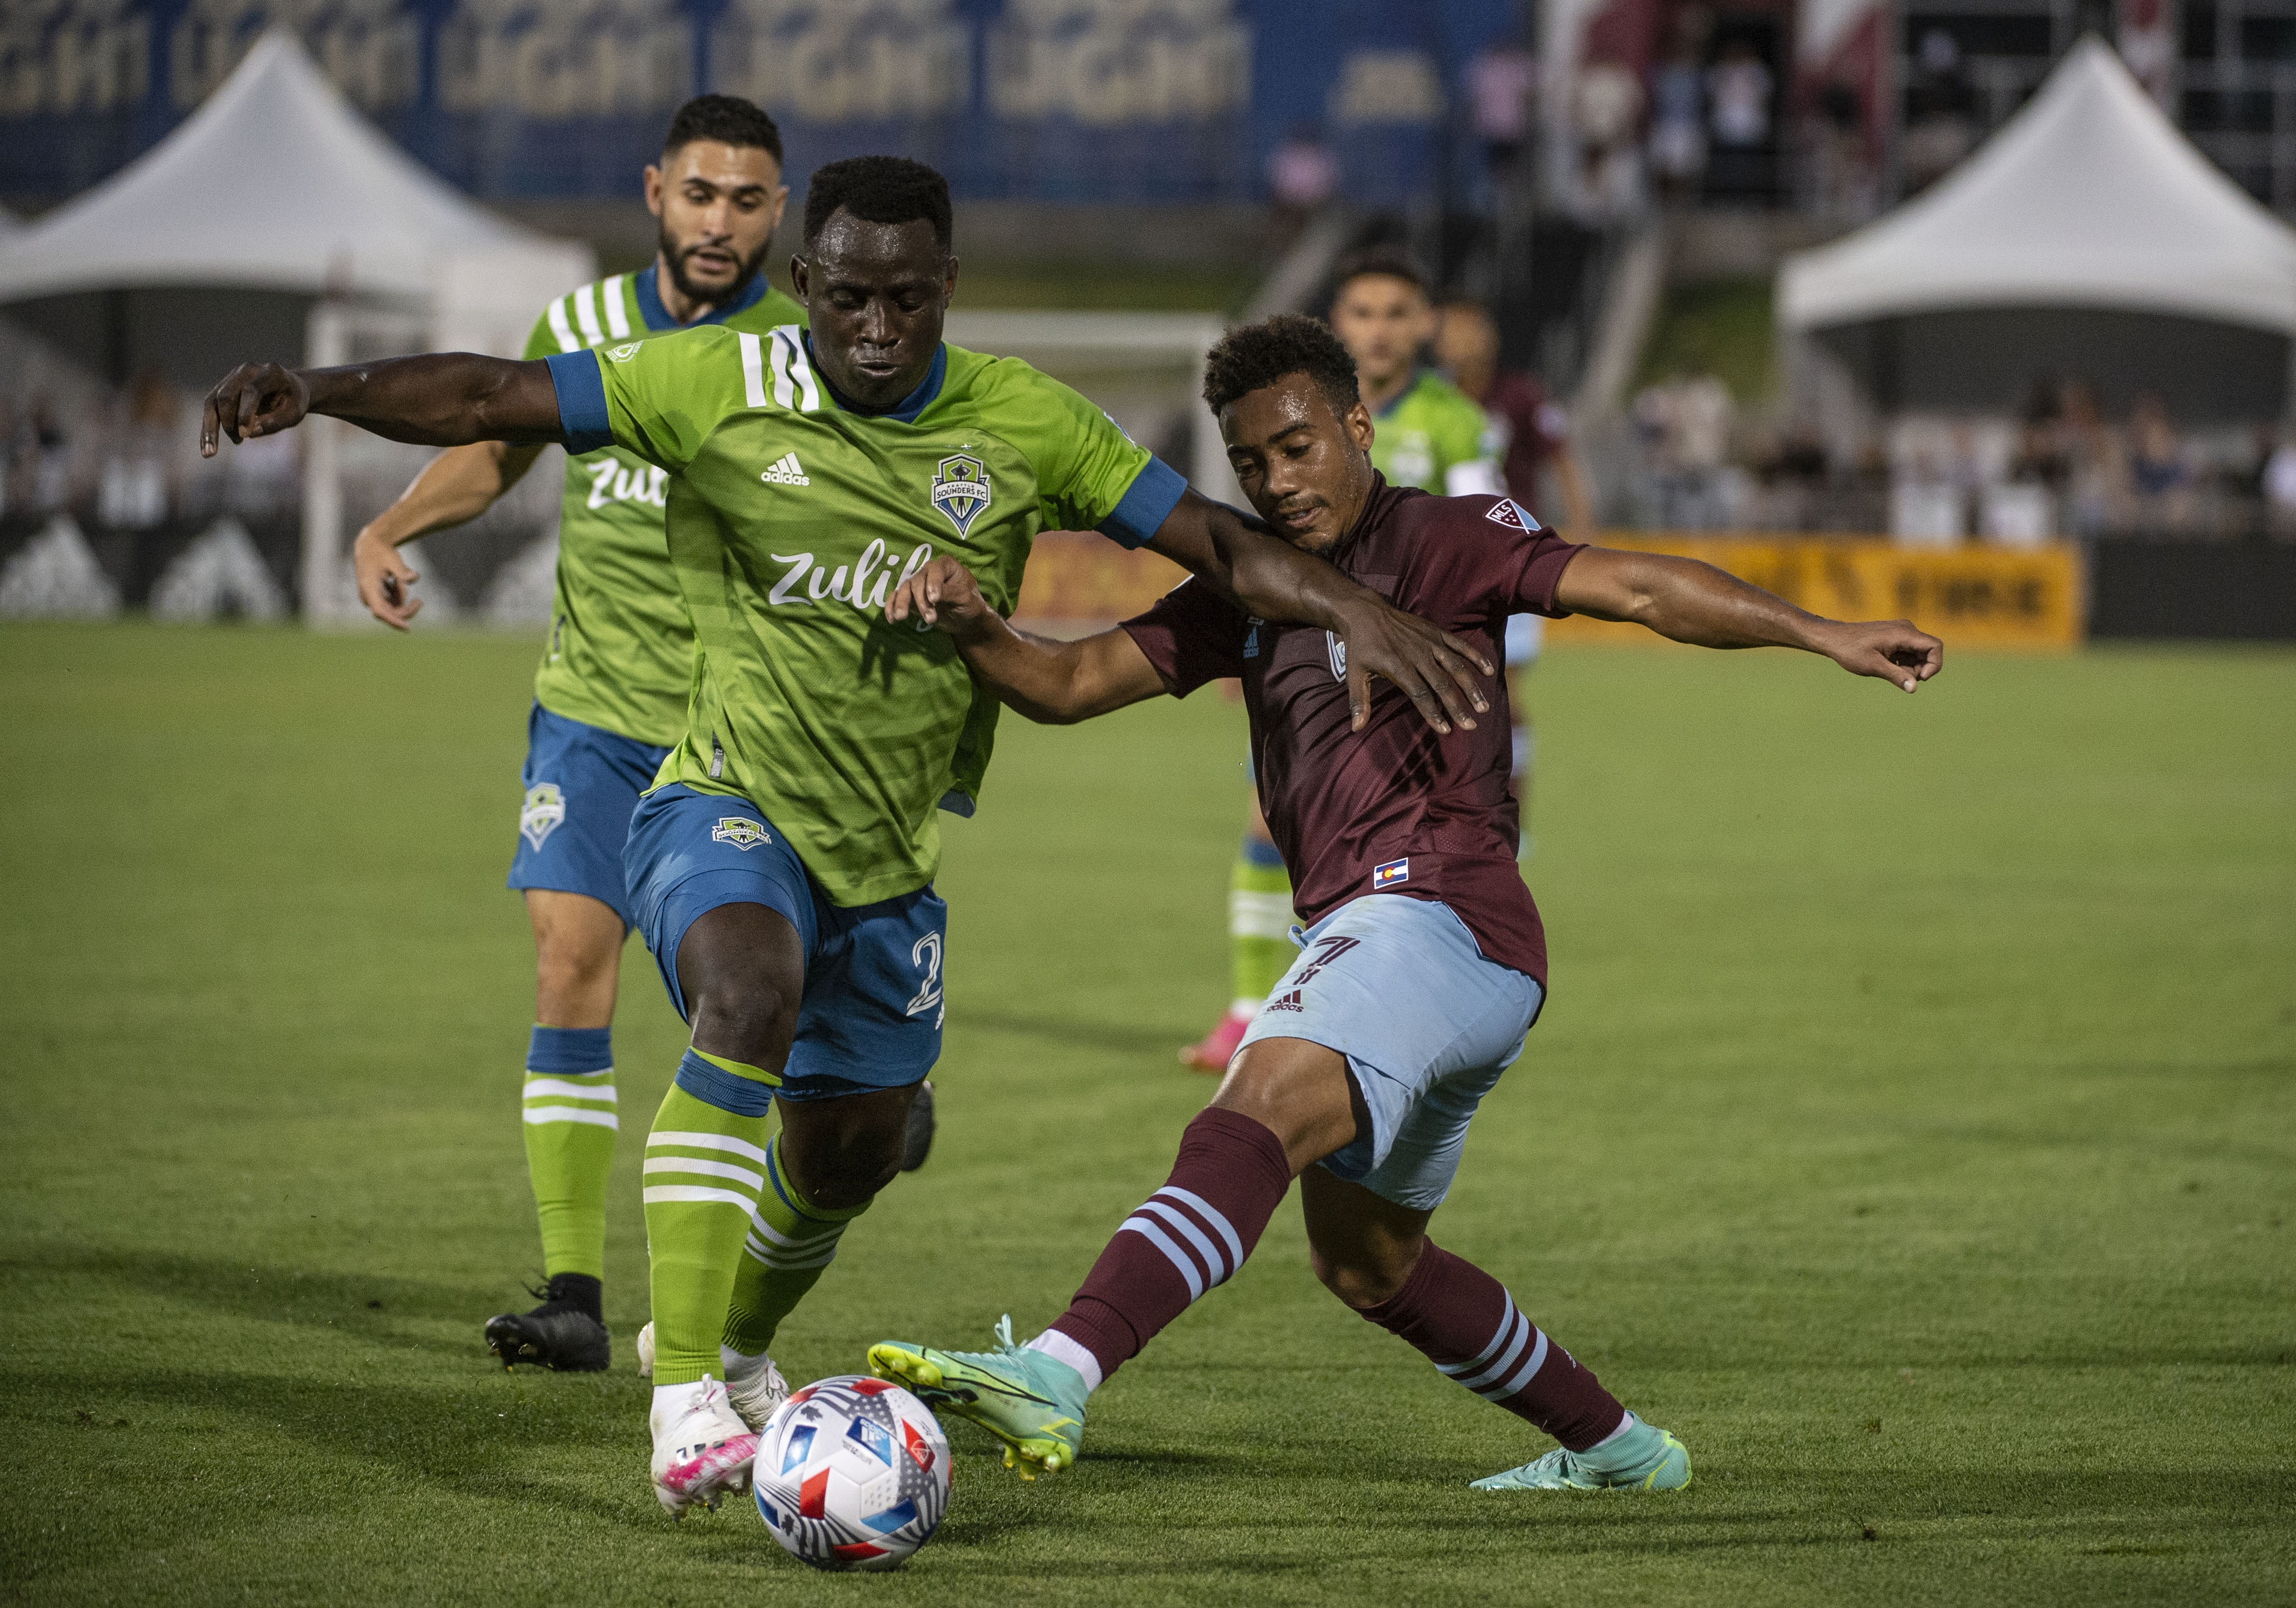 Sounders Defender Yeimar Gomez Andrade (28) and Rapids Forward Jonathan Lewis (7) battle for control during a Major League Soccer match between Seattle Sounders FC and Colorado Rapids on July 4, 2021 at Dick's Sporting Goods Park. 